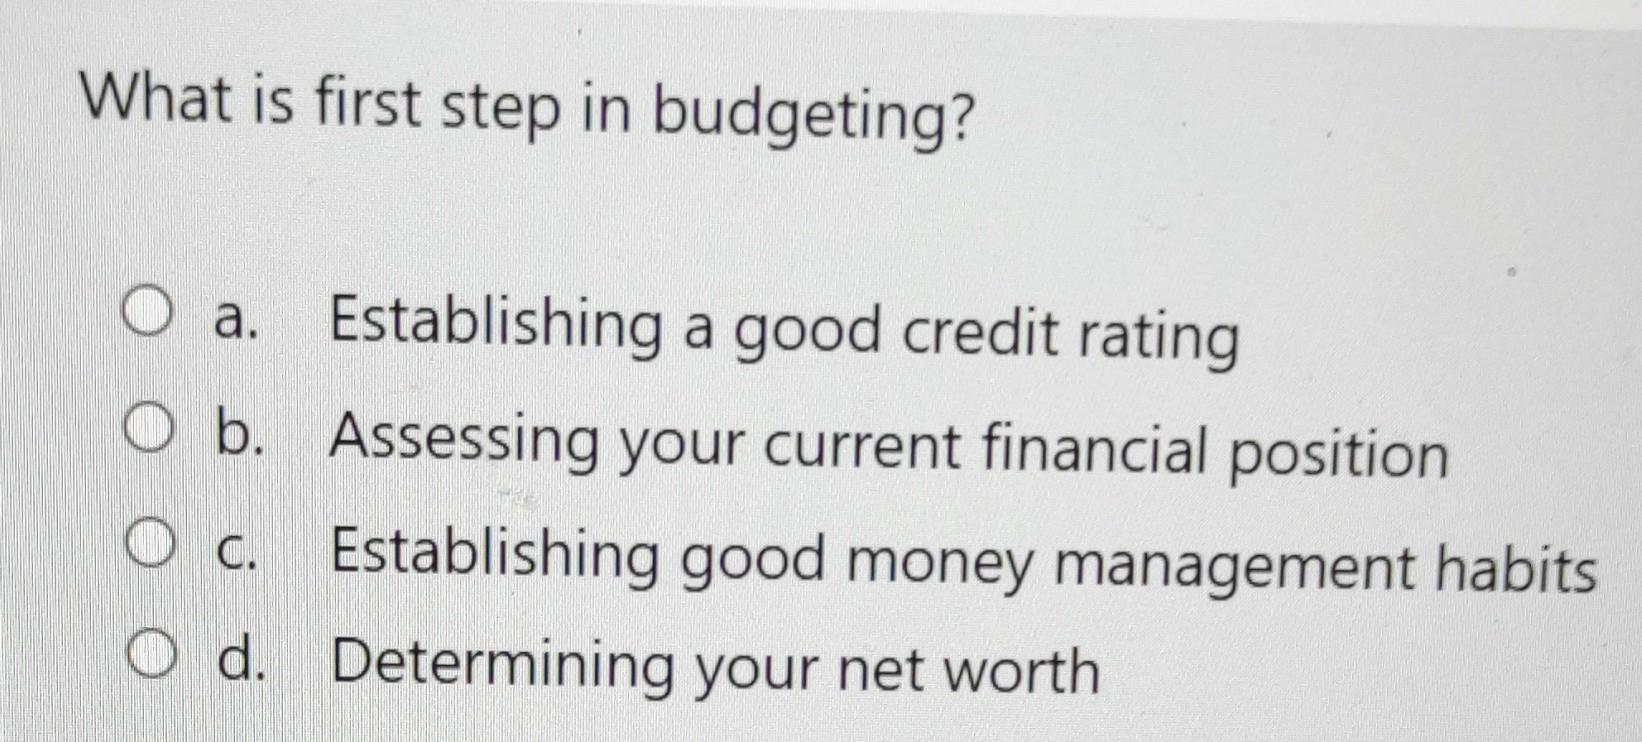 What is first step in budgeting? .. a. Establishing a good credit rating O b. Assessing your current financial position O c.